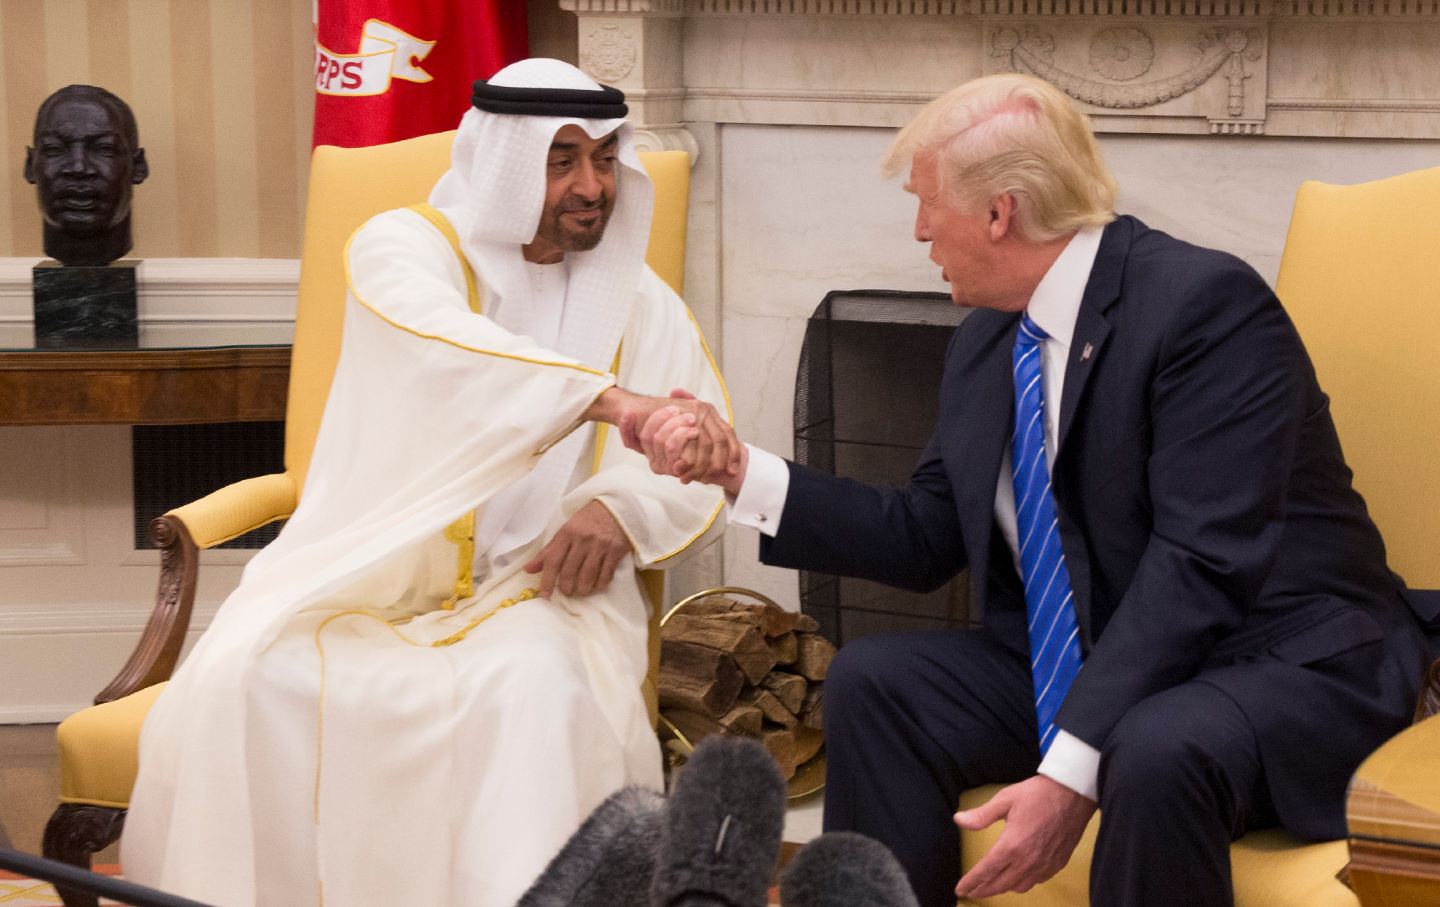 On the left, Shaikh Mohammed bin Zayed Al Nahyan sits and shakes Donald Trump's hand, on the right.